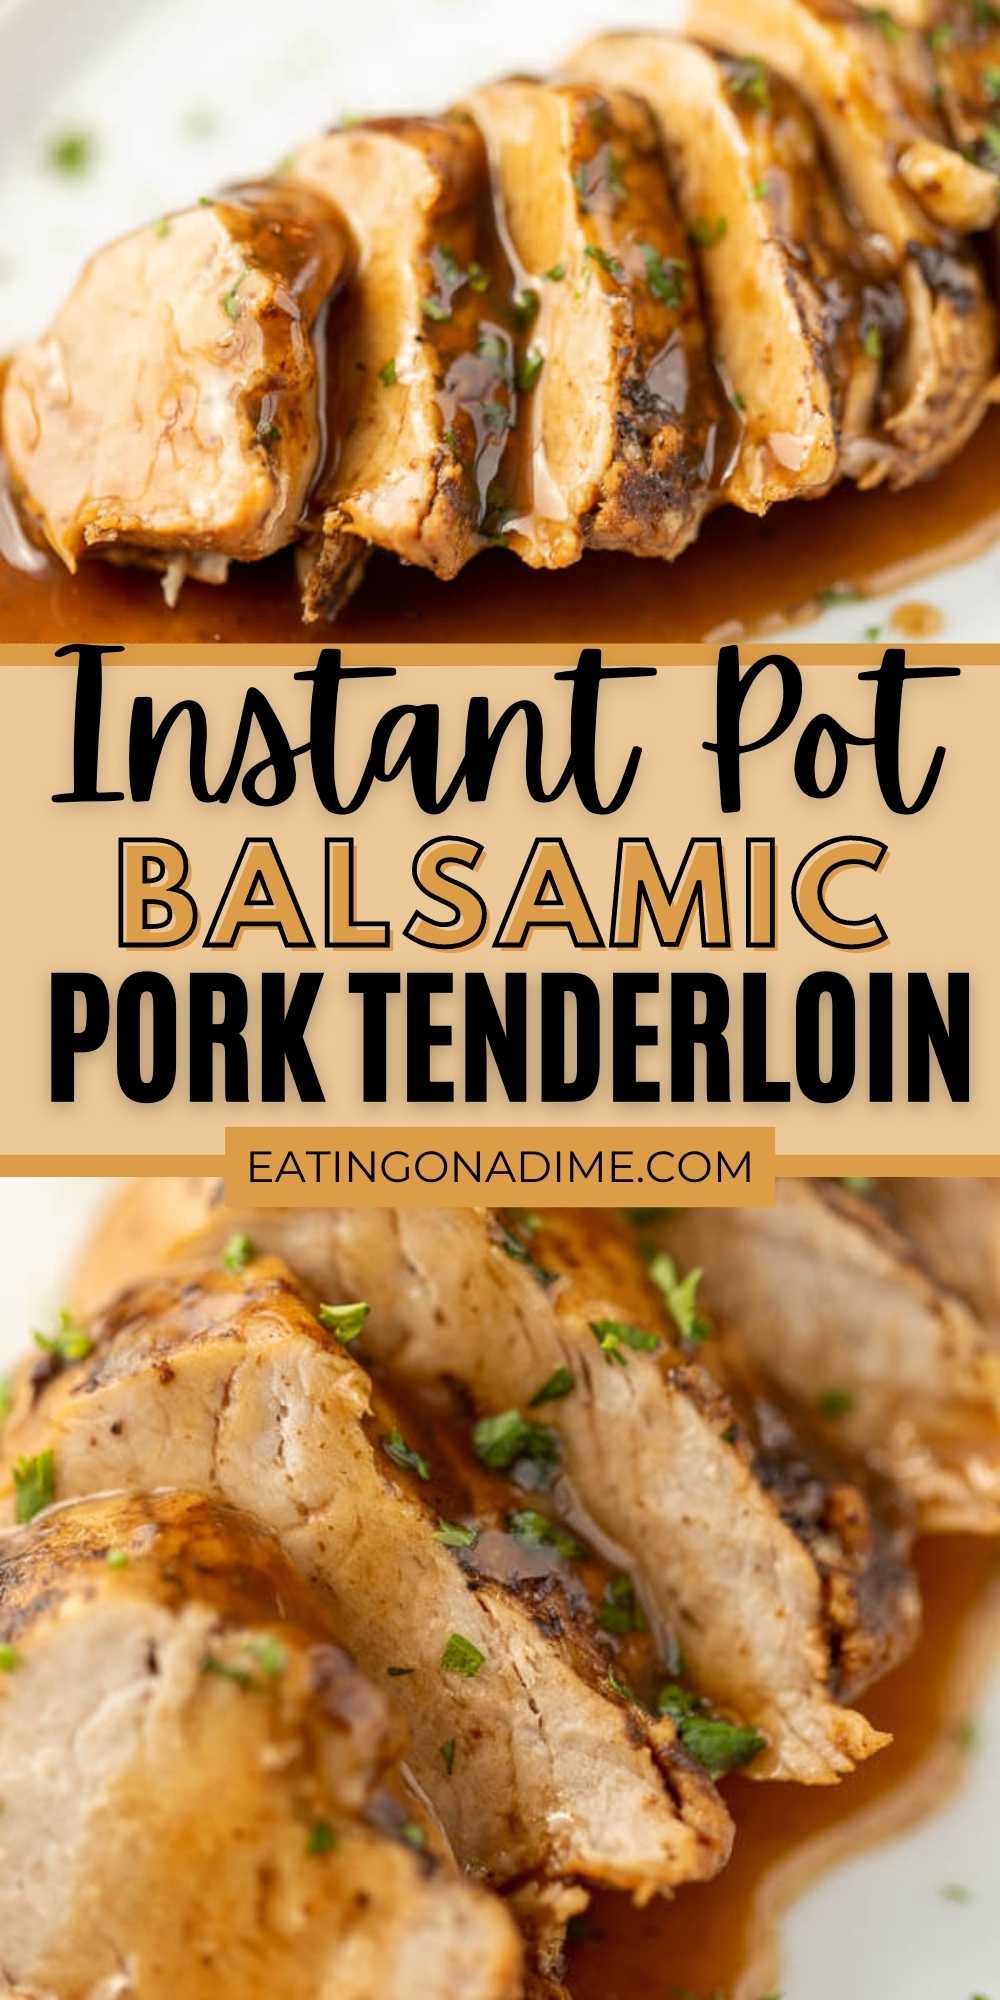 Try Pork Tenderloin Pressure Cooker Recipe for an amazing meal in minutes.The glaze on Instant pot balsamic pork tenderloin recipe is so tasty.  Try this brown sugar balsamic glazed pork tenderloin made in the instant pot today! #eatingonadime #instantpotrecipes #porkrecipes #balsamicrecipes 
